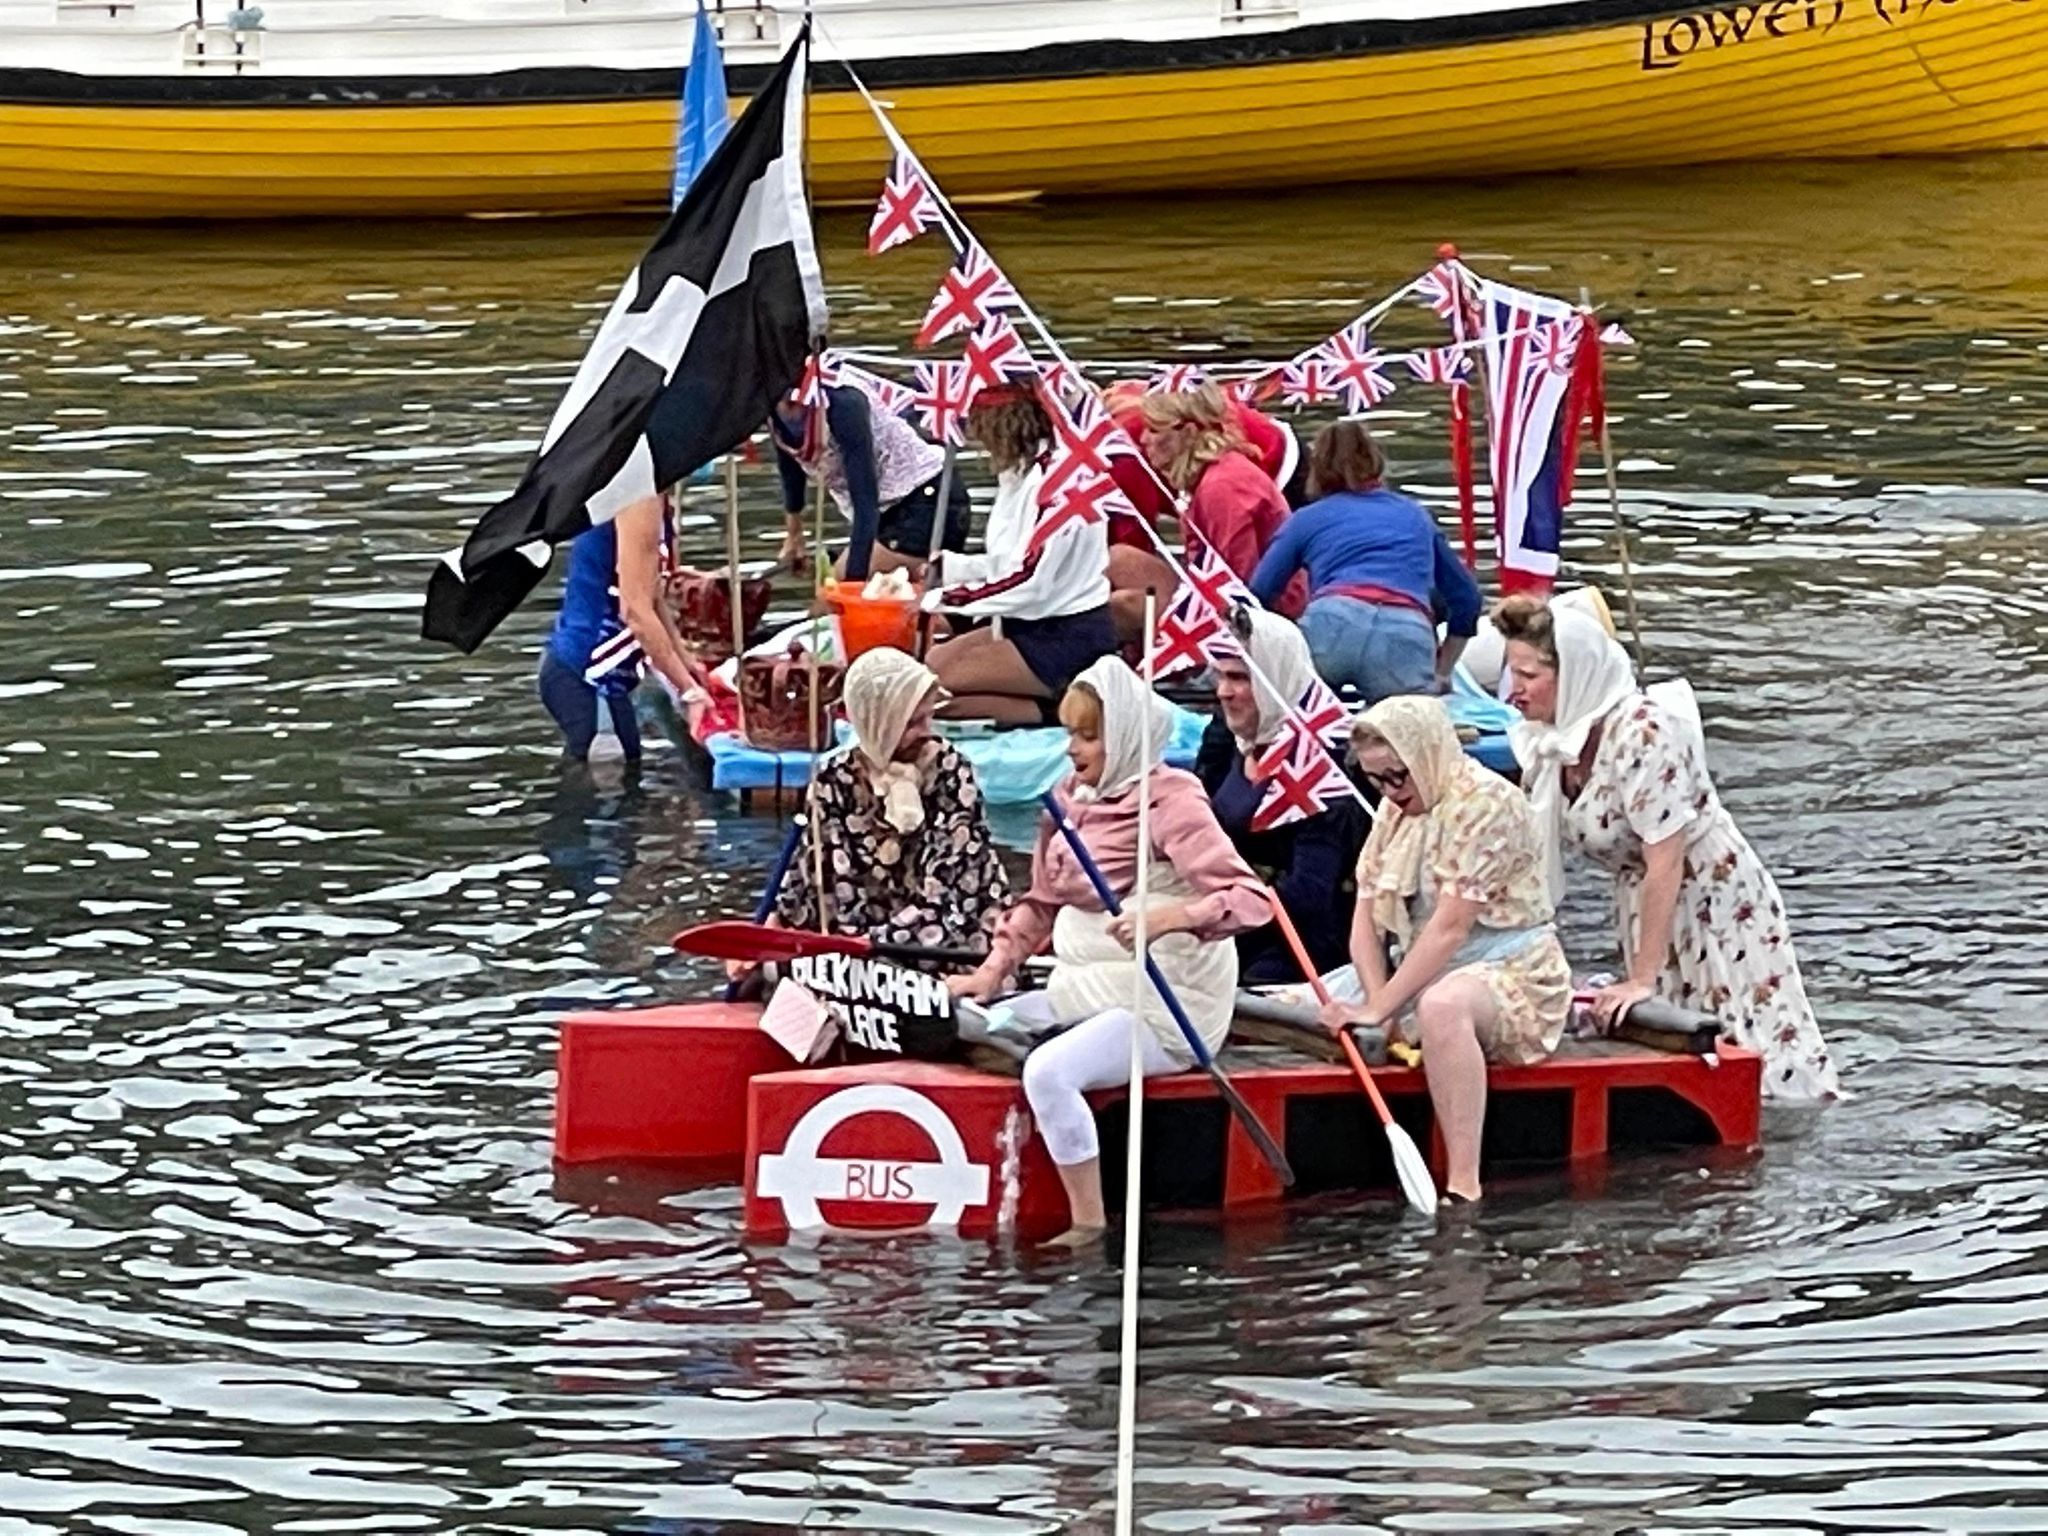 A London bus themed raft with another behind Picture: James Kitto